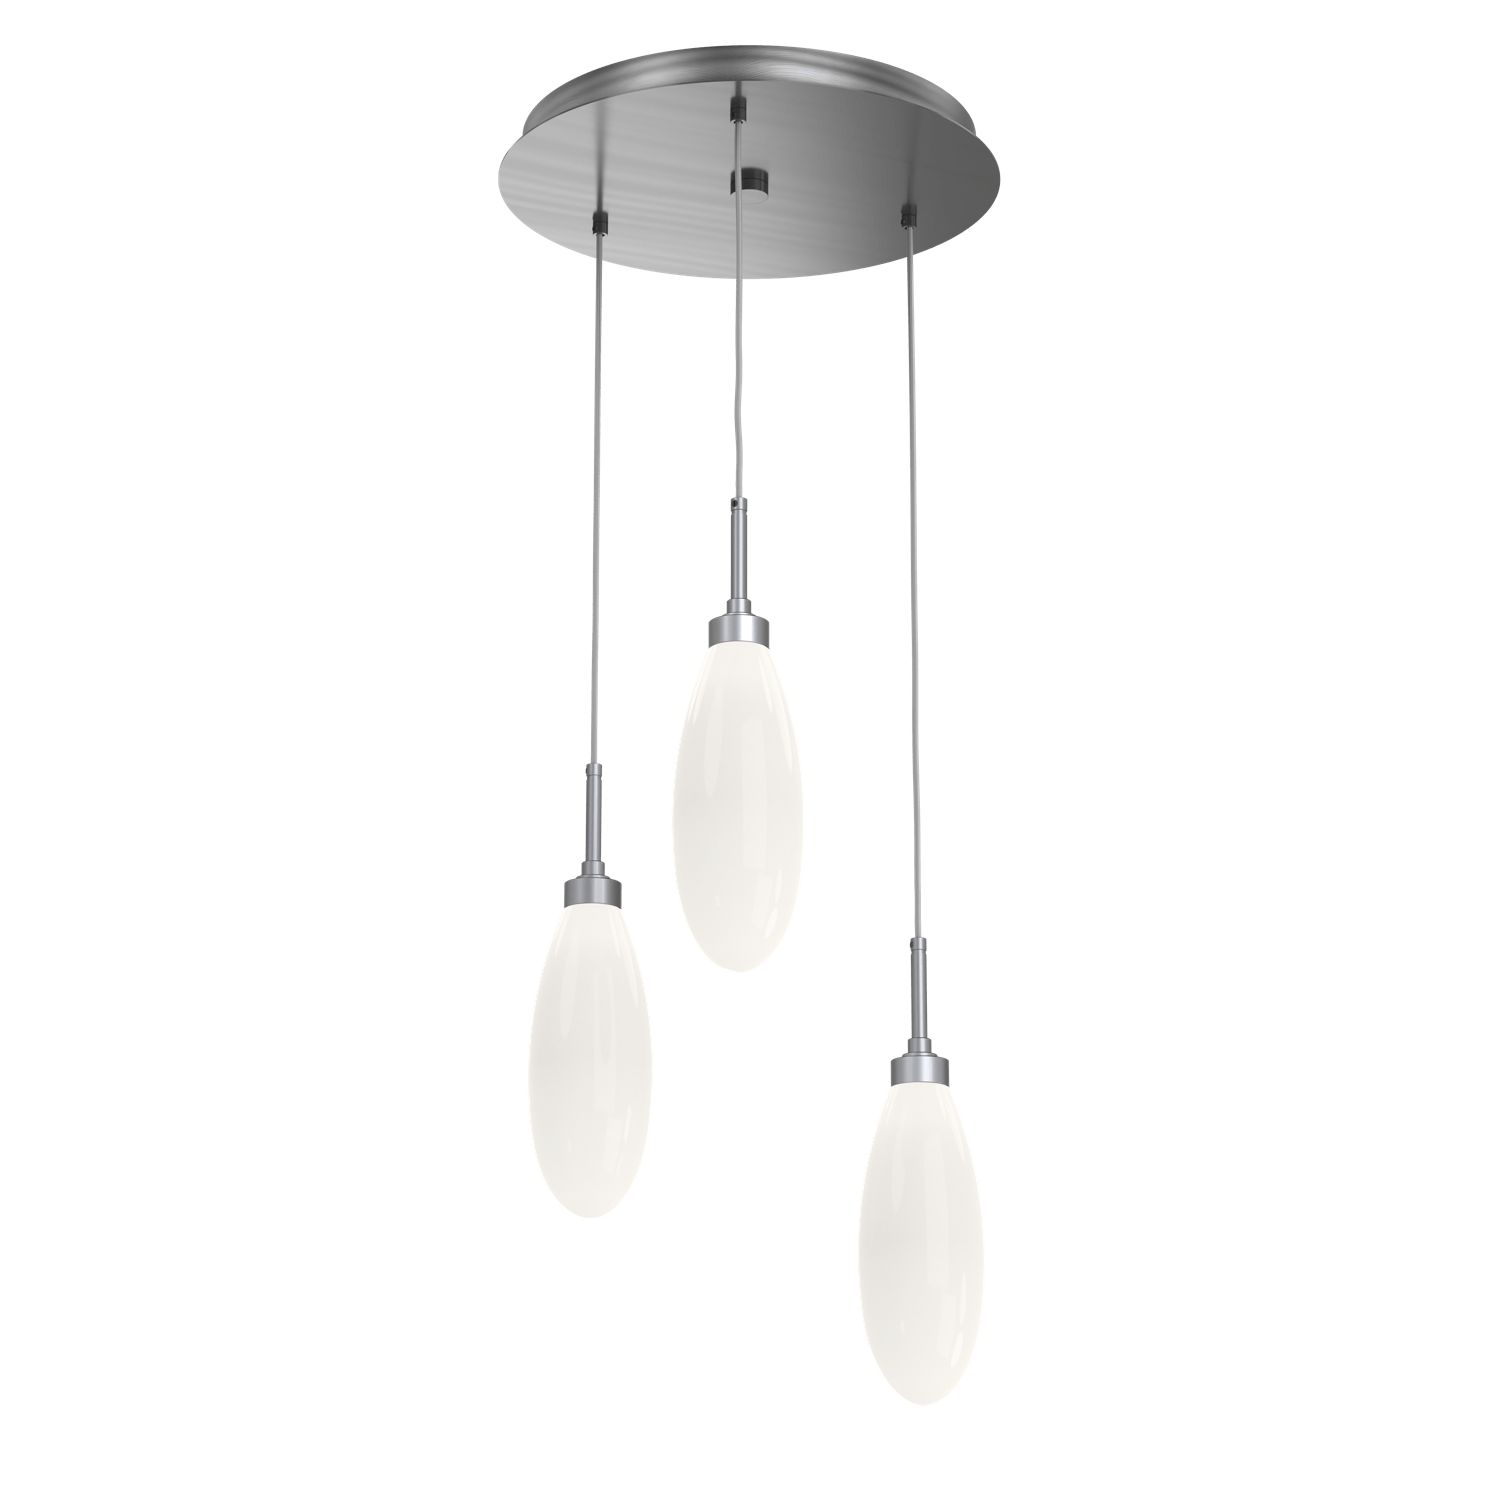 CHB0071-03-GM-WL-LL-Hammerton-Studio-Fiori-3-light-round-pendant-chandelier-with-gunmetal-finish-and-opal-white-glass-shades-and-LED-lamping